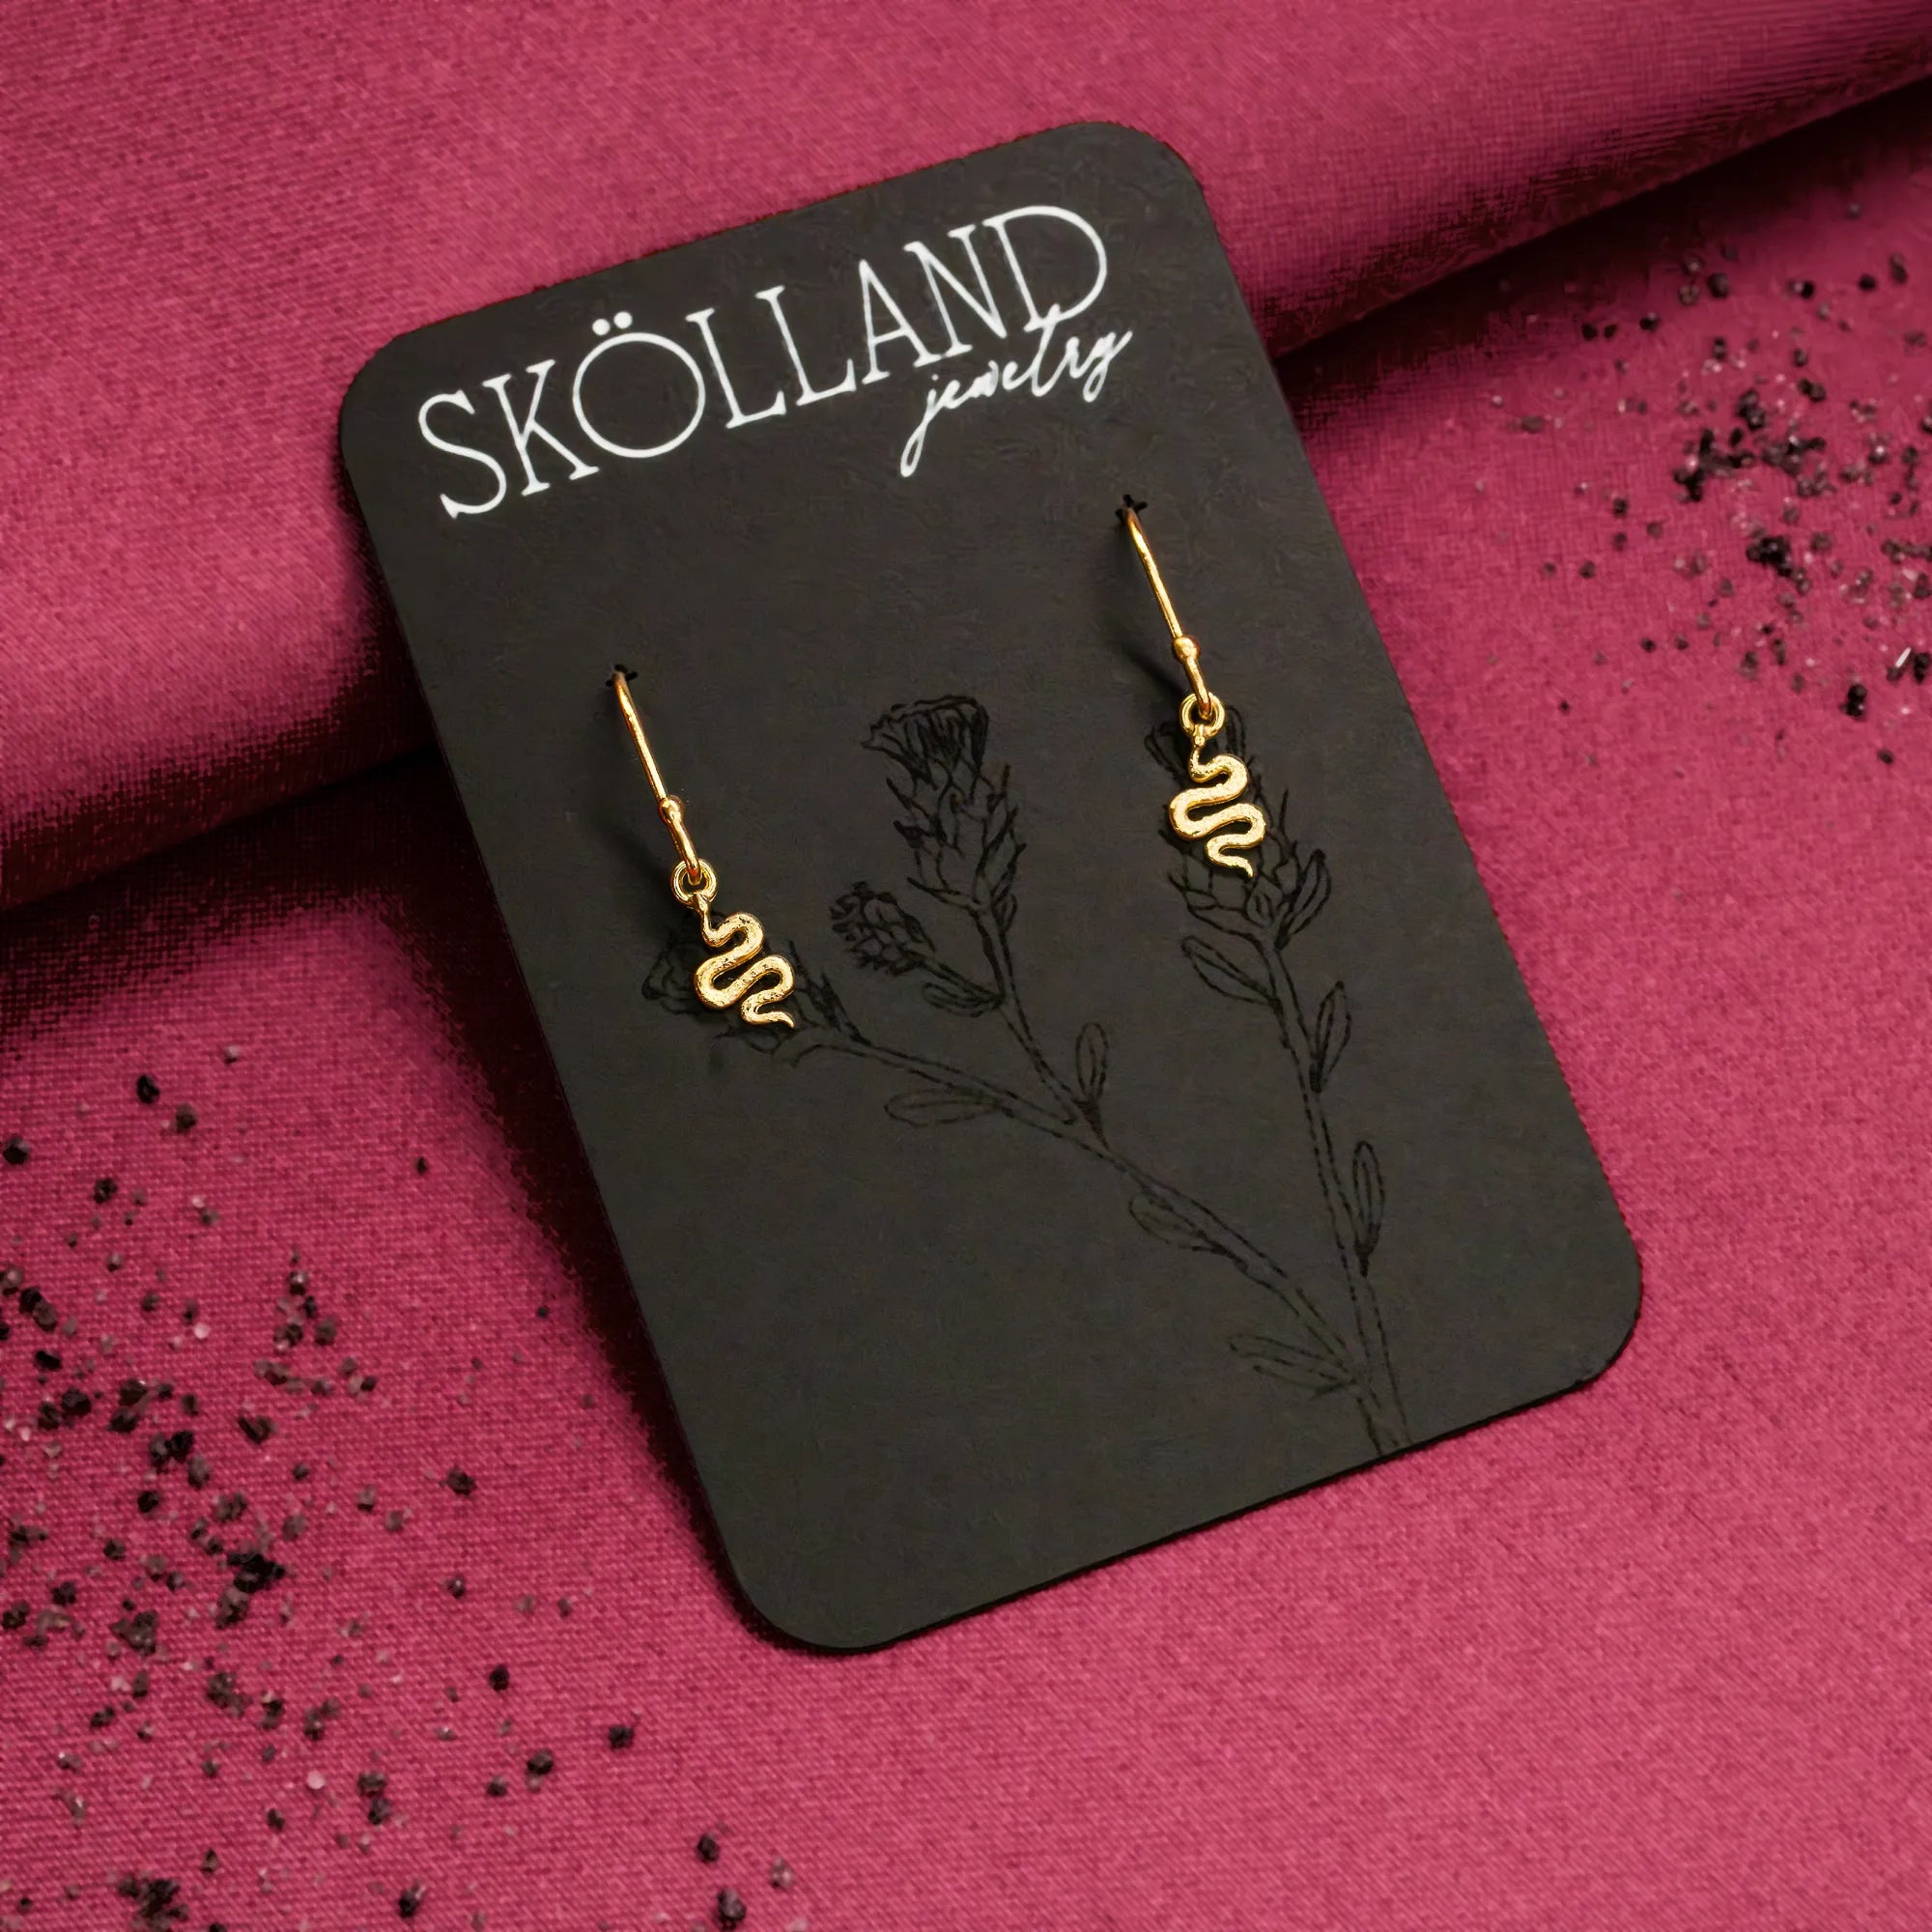 a pair of 14K yellow gold snake earrings on a black earring card. The snake charms are on ear wires, they easily move.